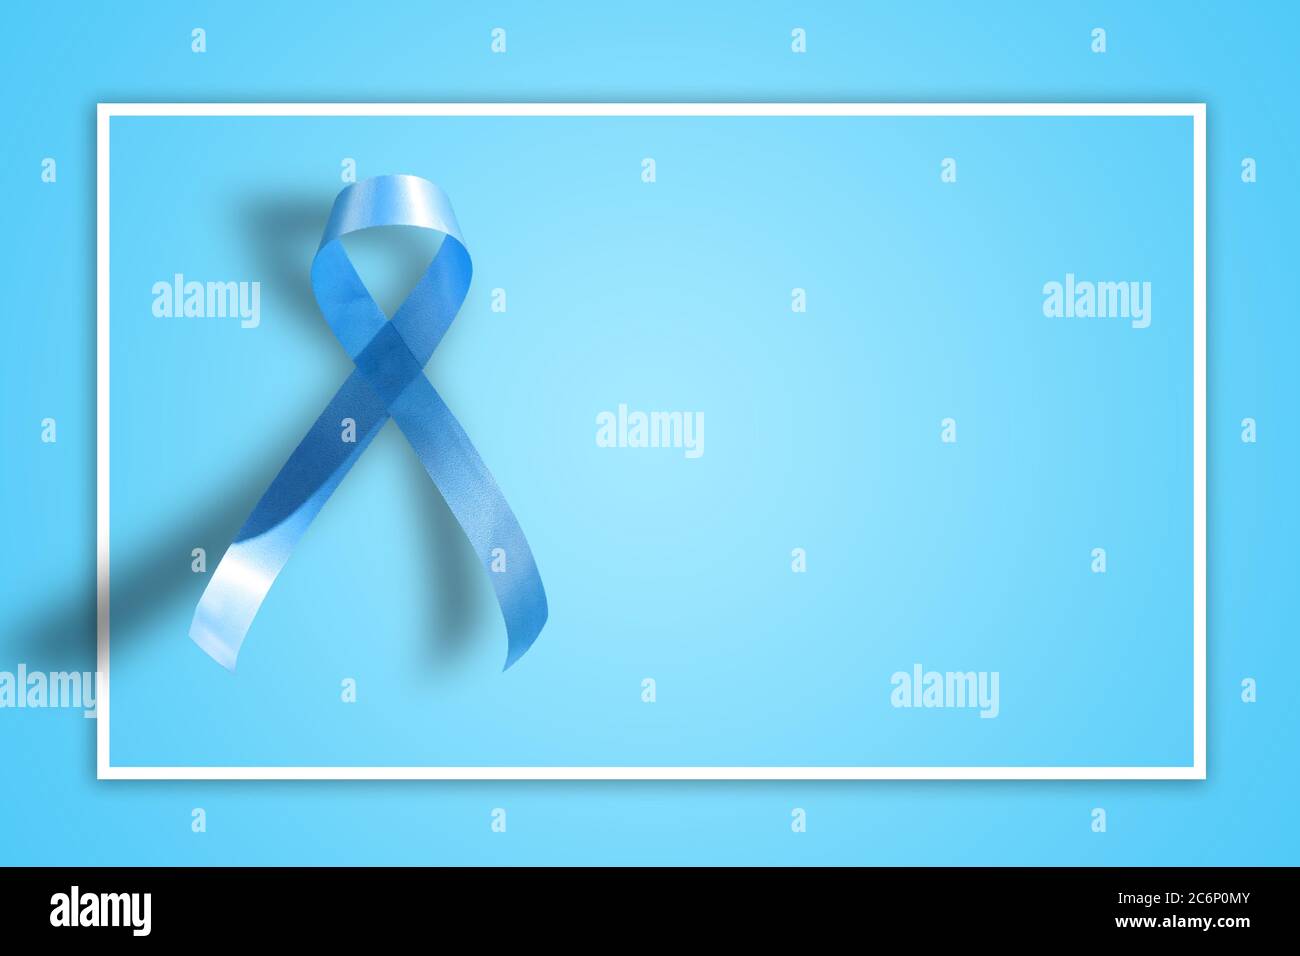 blue ribbon on blue background representing an annual event during the month of November to raise awareness of men's health issues and prostate cancer Stock Photo